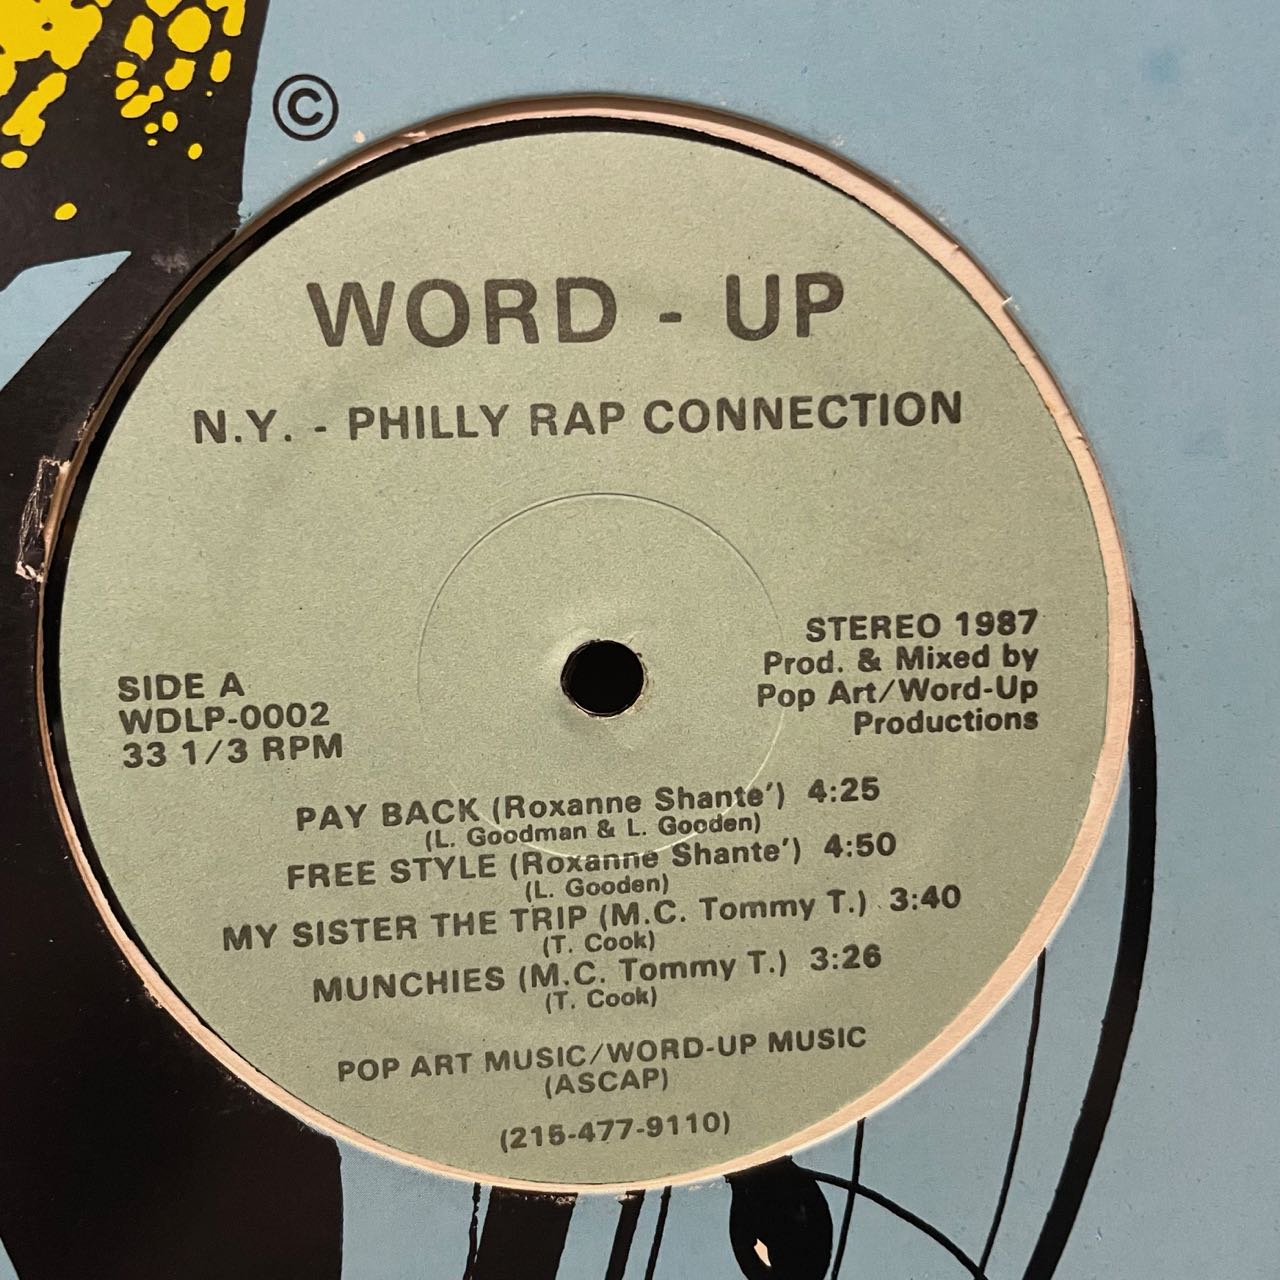 N.Y. - PHILLY RAP CONNECTION/V.A (D.J. GROOVE)/中古レコード通販 ...